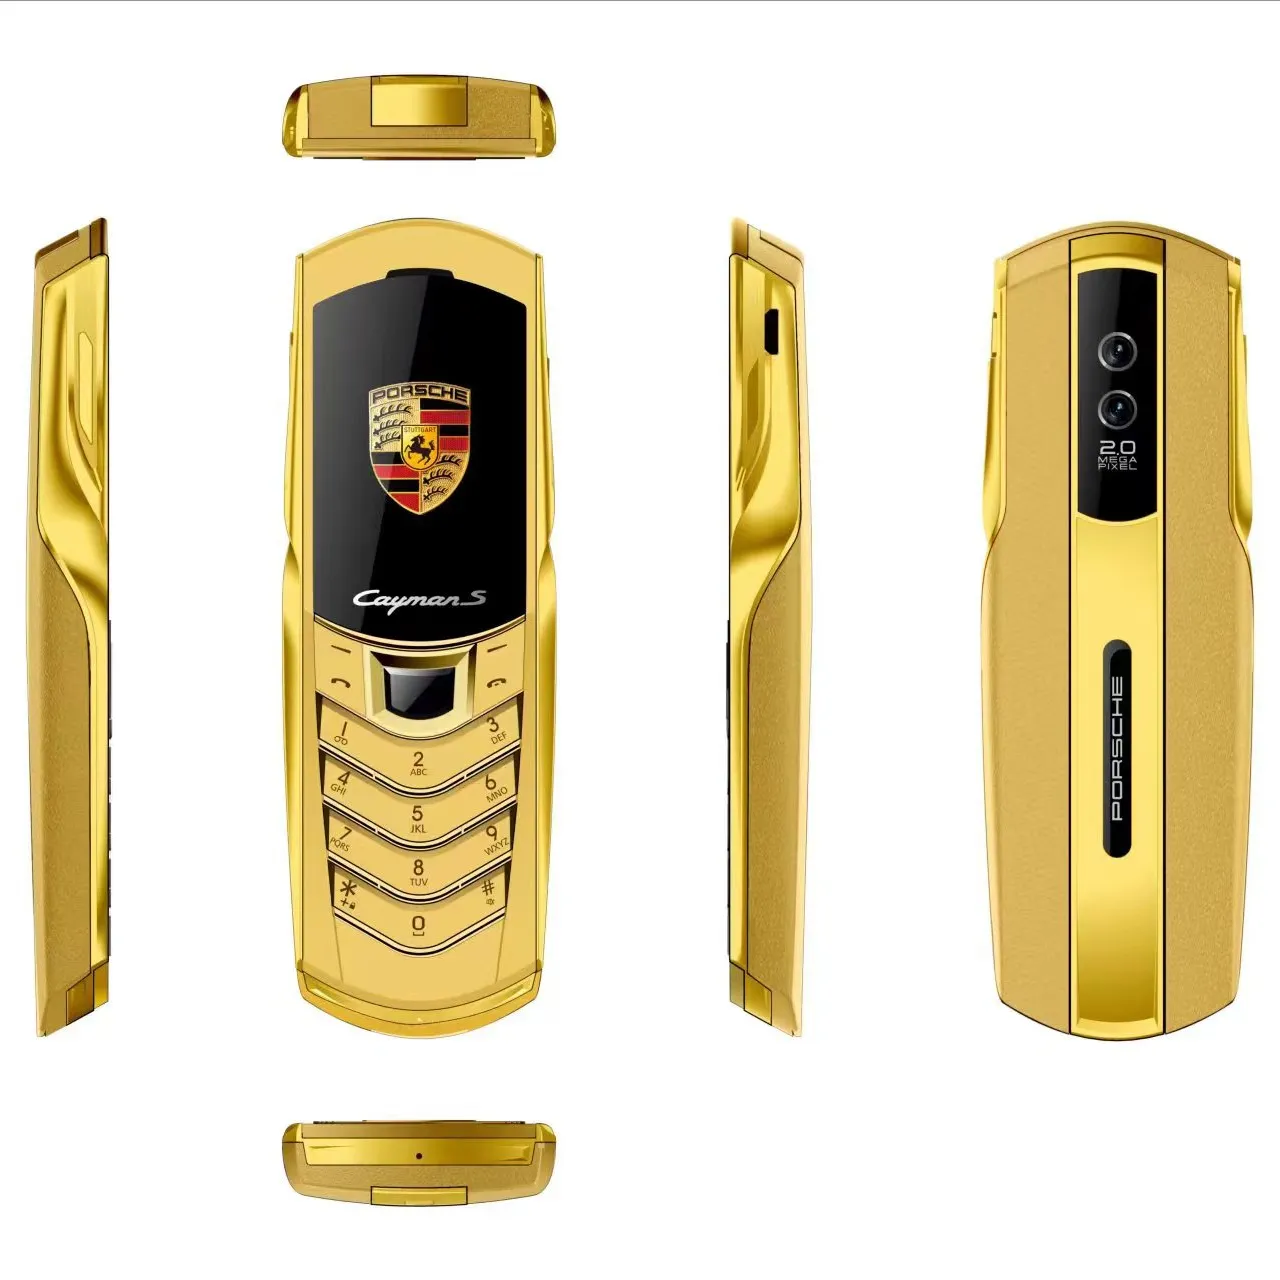 2023 New luxury Porscher gold gsm 2g mobile phone Dual SIM Card for business elderly student mini phone